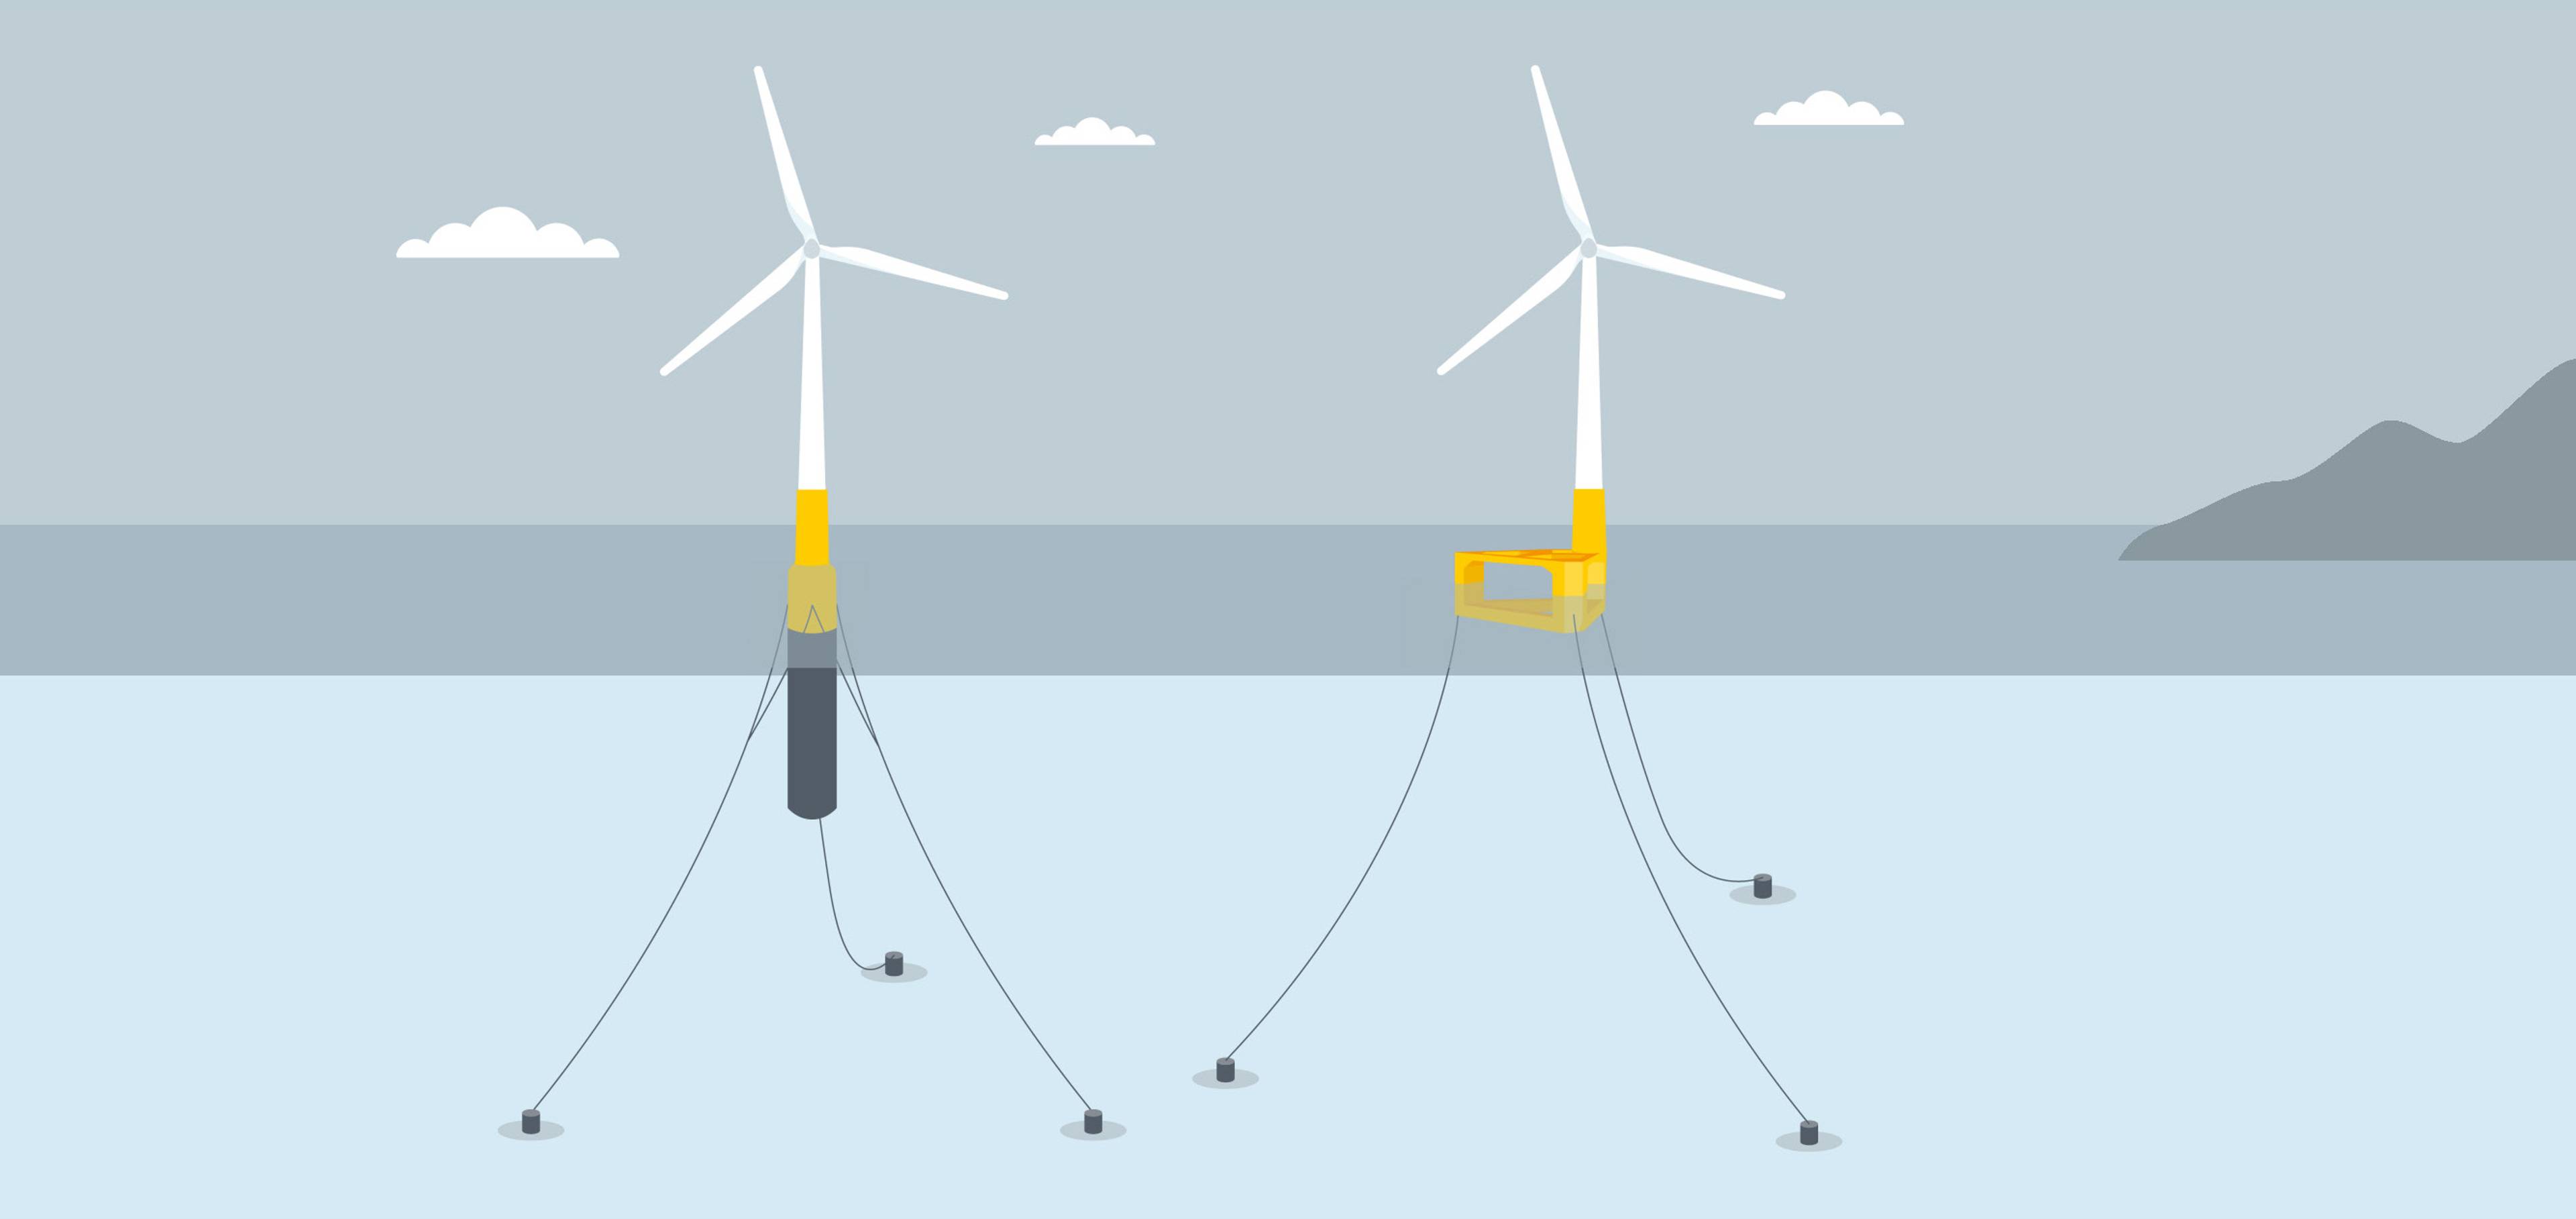 Illustration of two different floating wind turbines